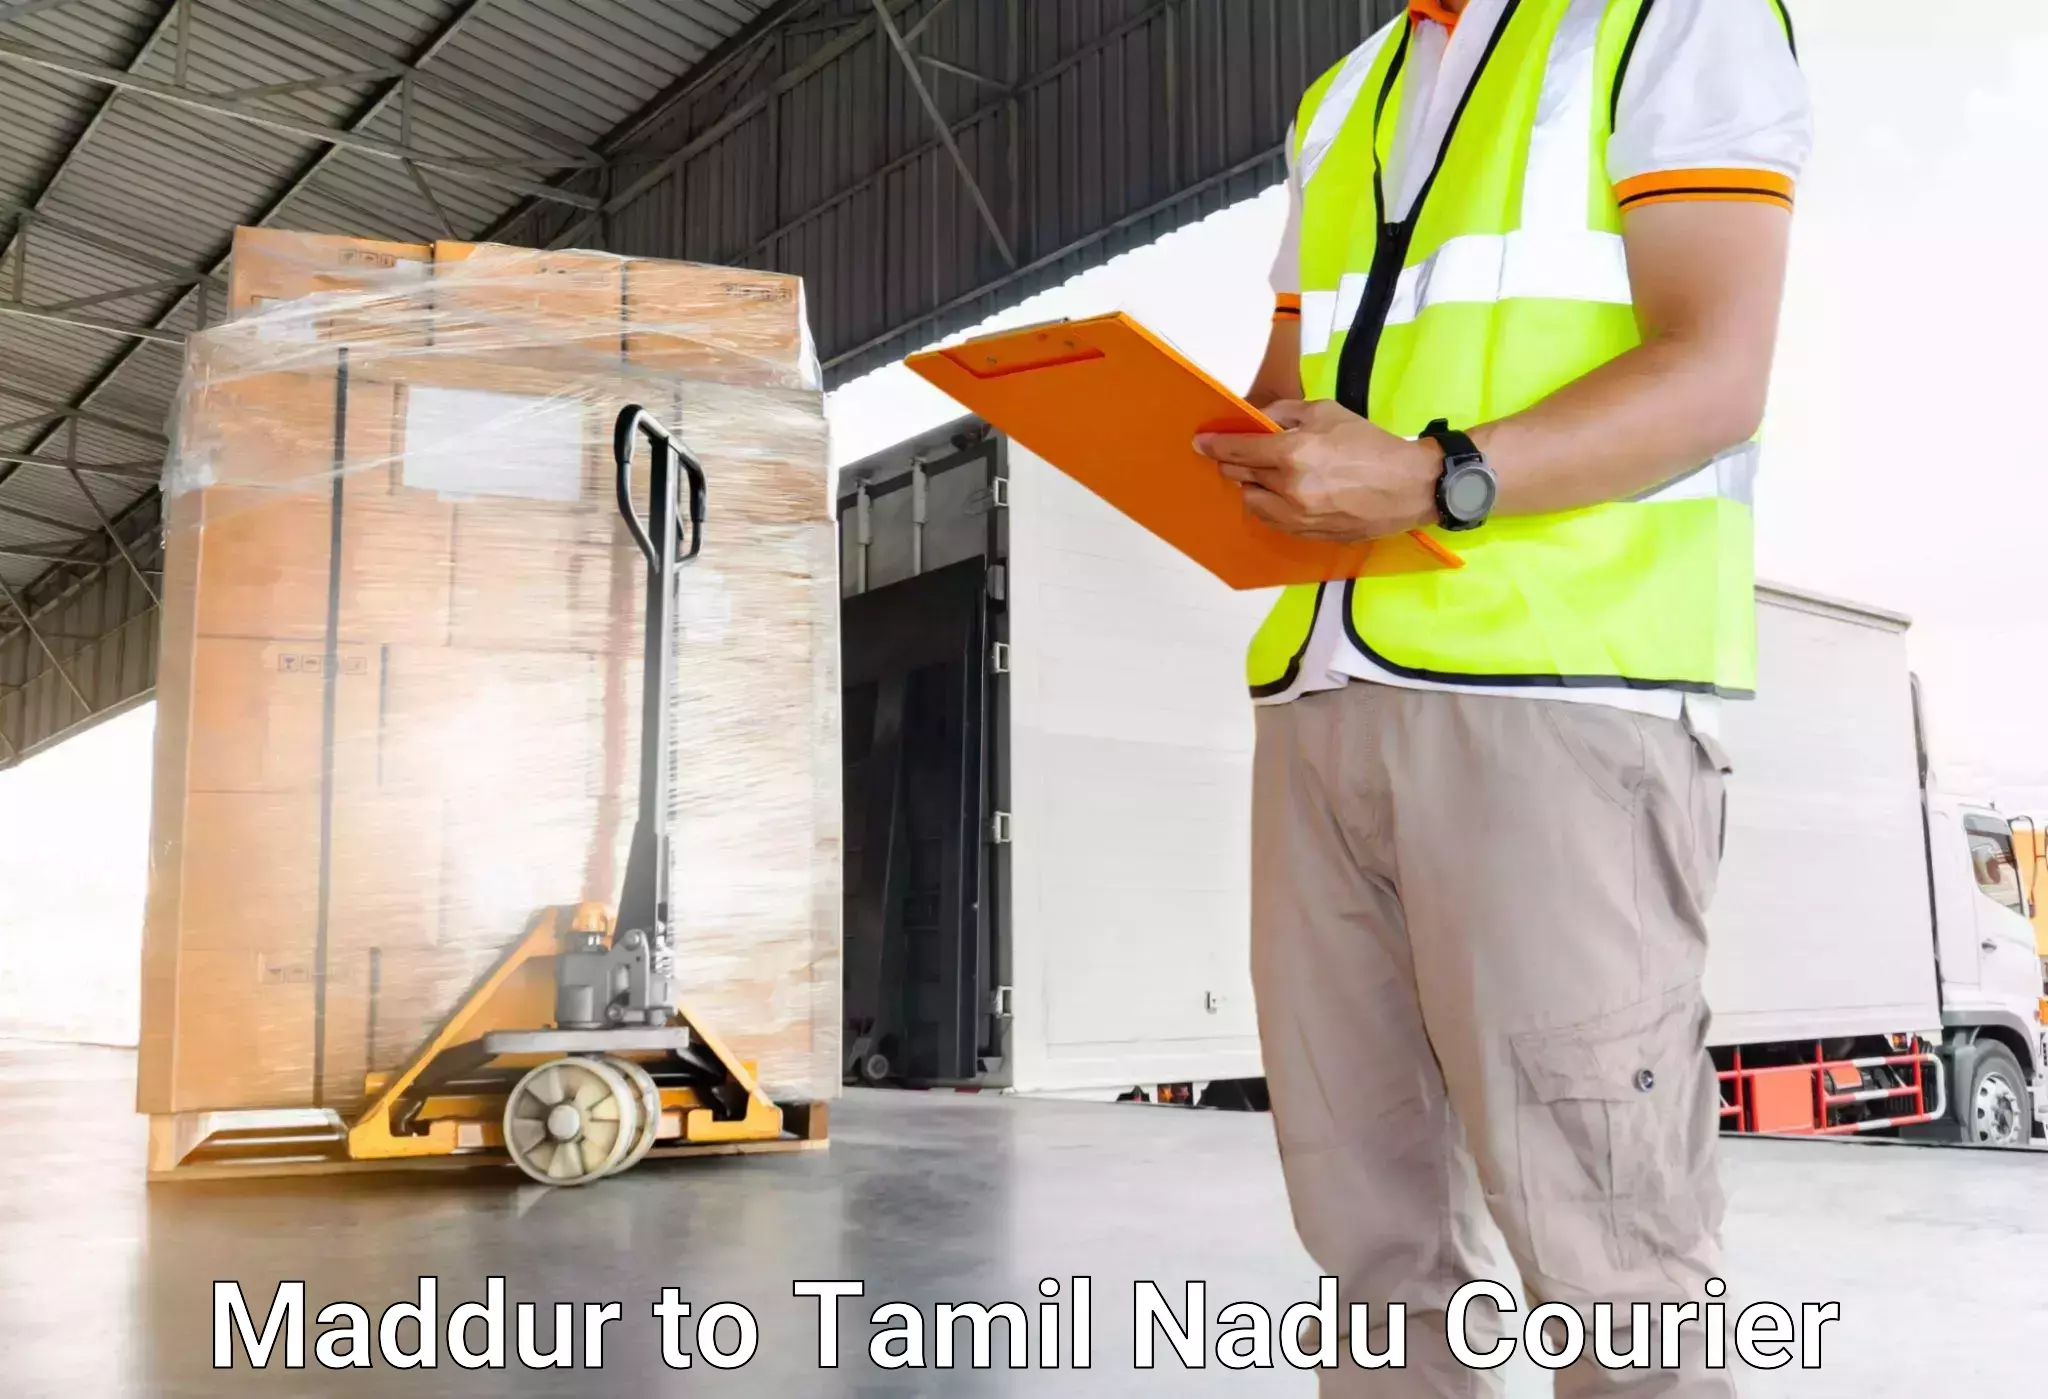 Luggage delivery providers in Maddur to Chennai